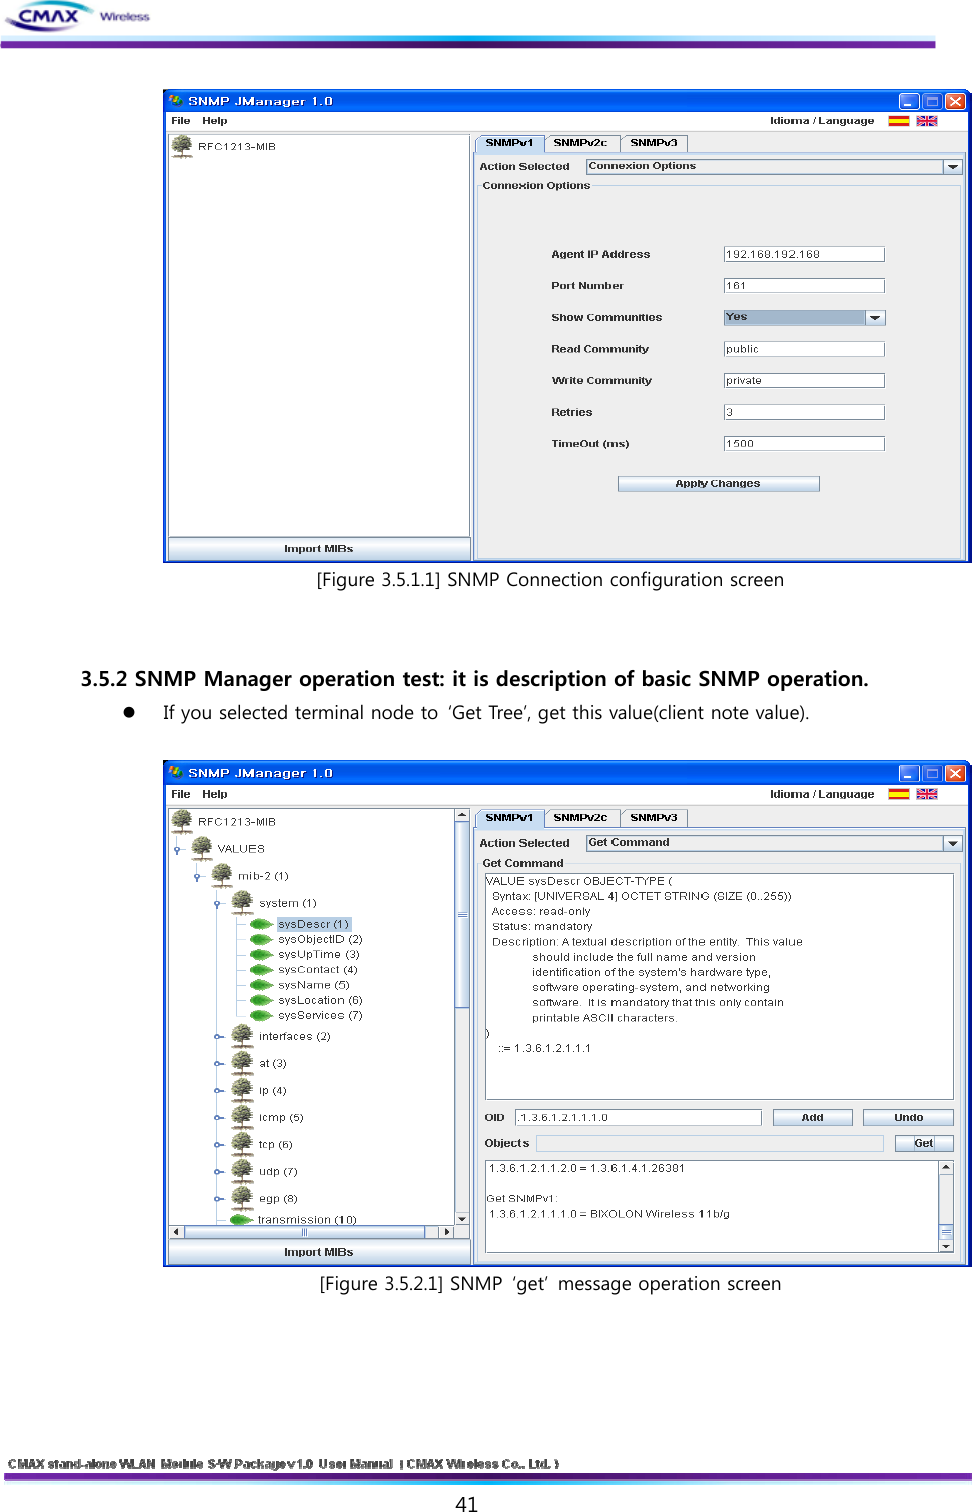   41   [Figure 3.5.1.1] SNMP Connection configuration screen   3.5.2 SNMP Manager operation test: it is description of basic SNMP operation.  If you selected terminal node to  ‘Get Tree’, get this value(client note value).   [Figure 3.5.2.1] SNMP  ‘get’  message operation screen     